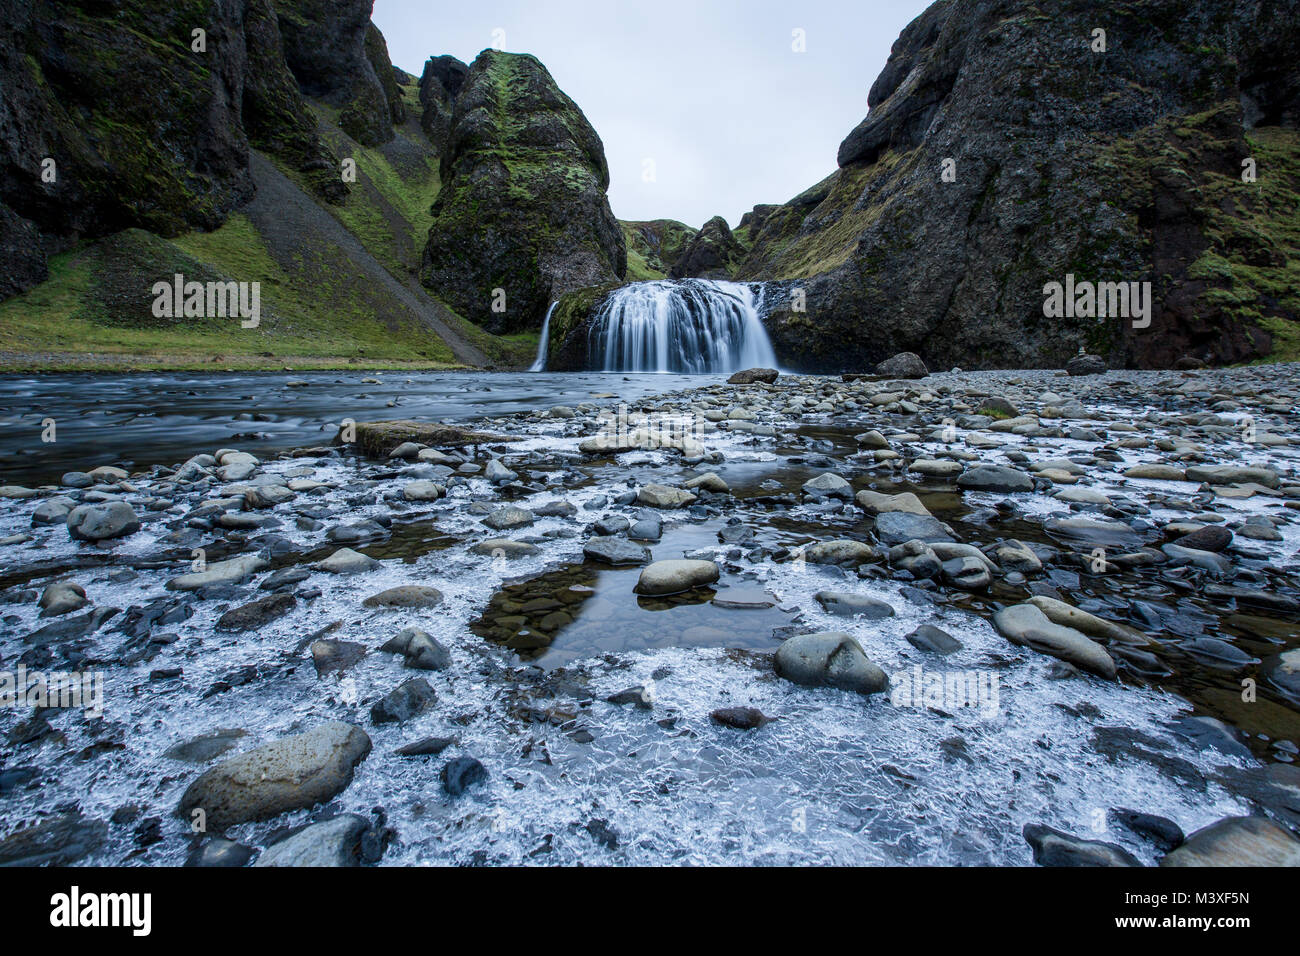 Waterfall at Kirkjubaejarklaustur, Suourland or Southern Iceland, Iceland, Europe Stock Photo